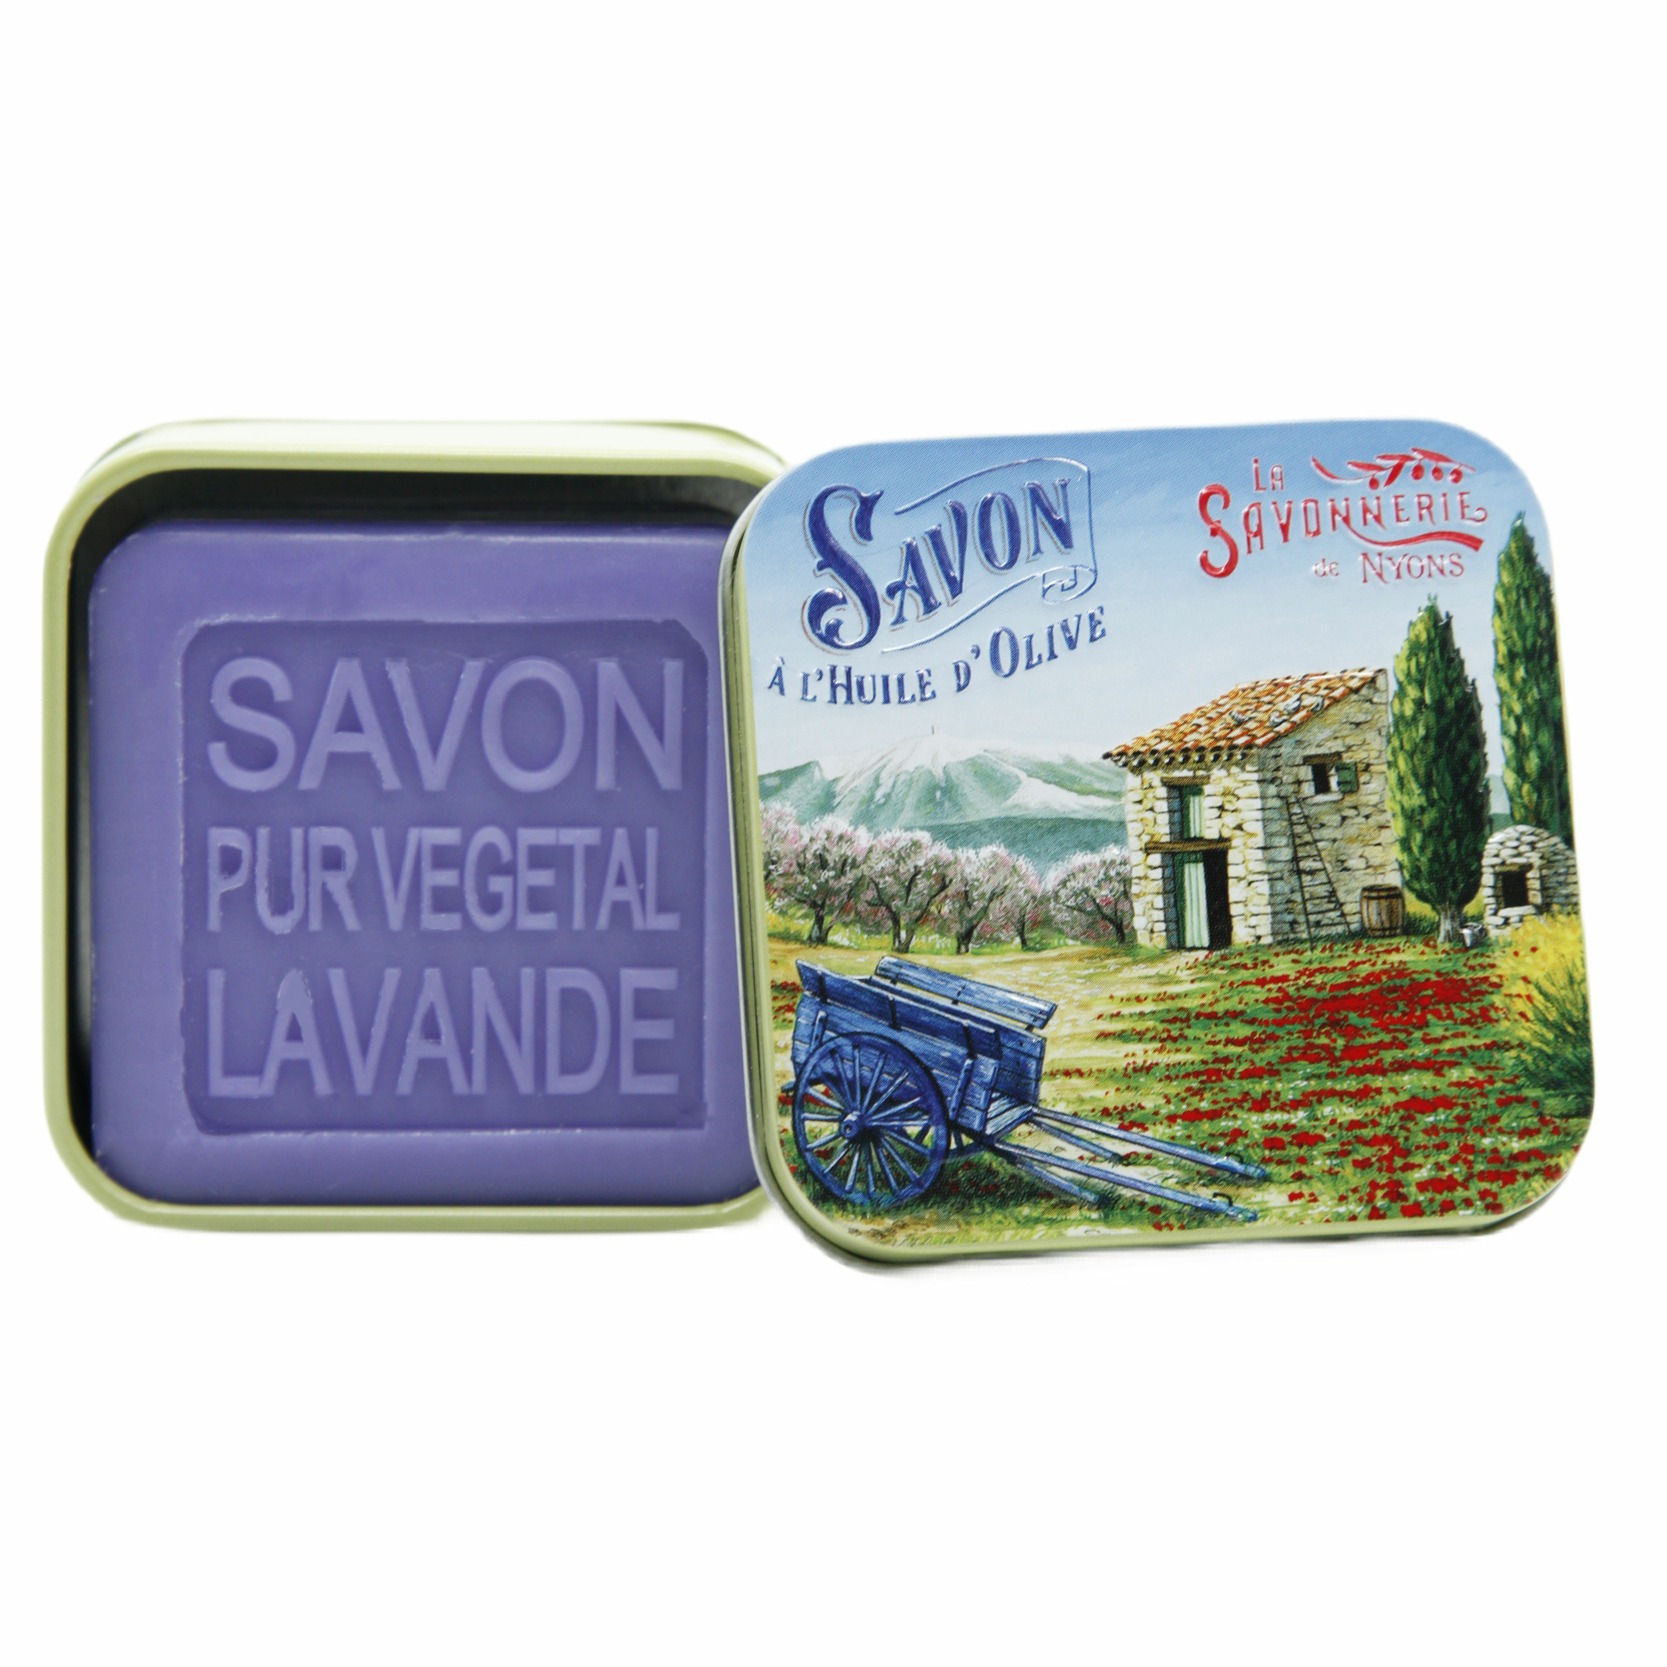 3.5oz, Lavander Soap in The Shed Tin Box